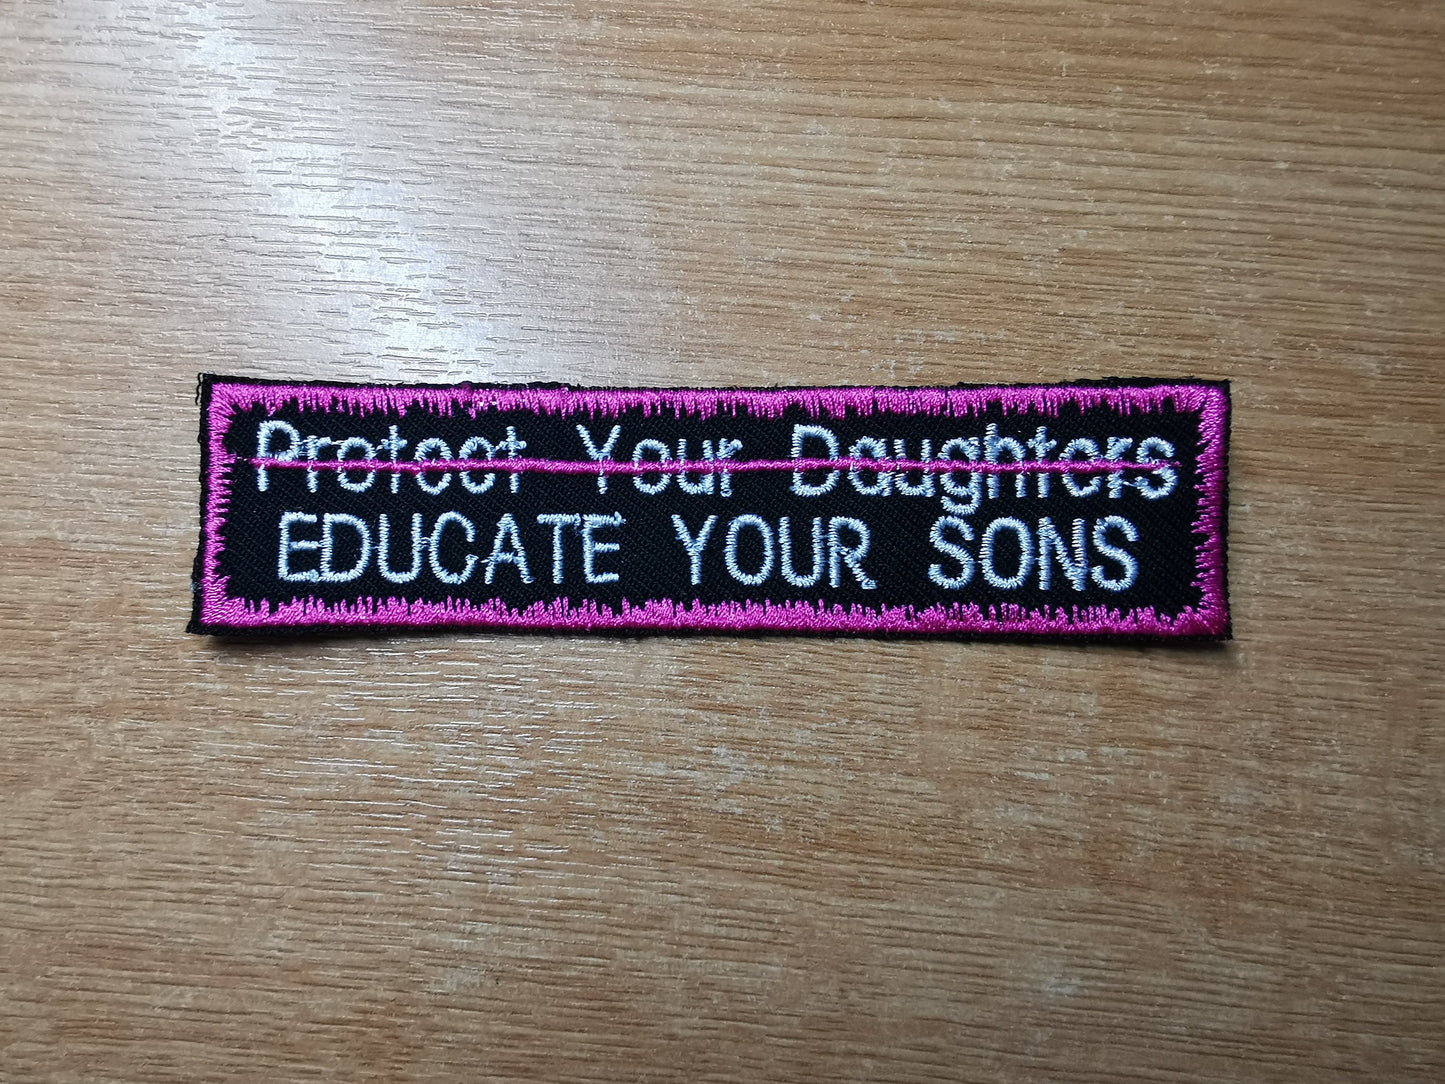 Educate Your Sons Not Protect Your Daughters Embroidered Patch Patriarchy Feminist Protest Patch - Flamingo Pink!